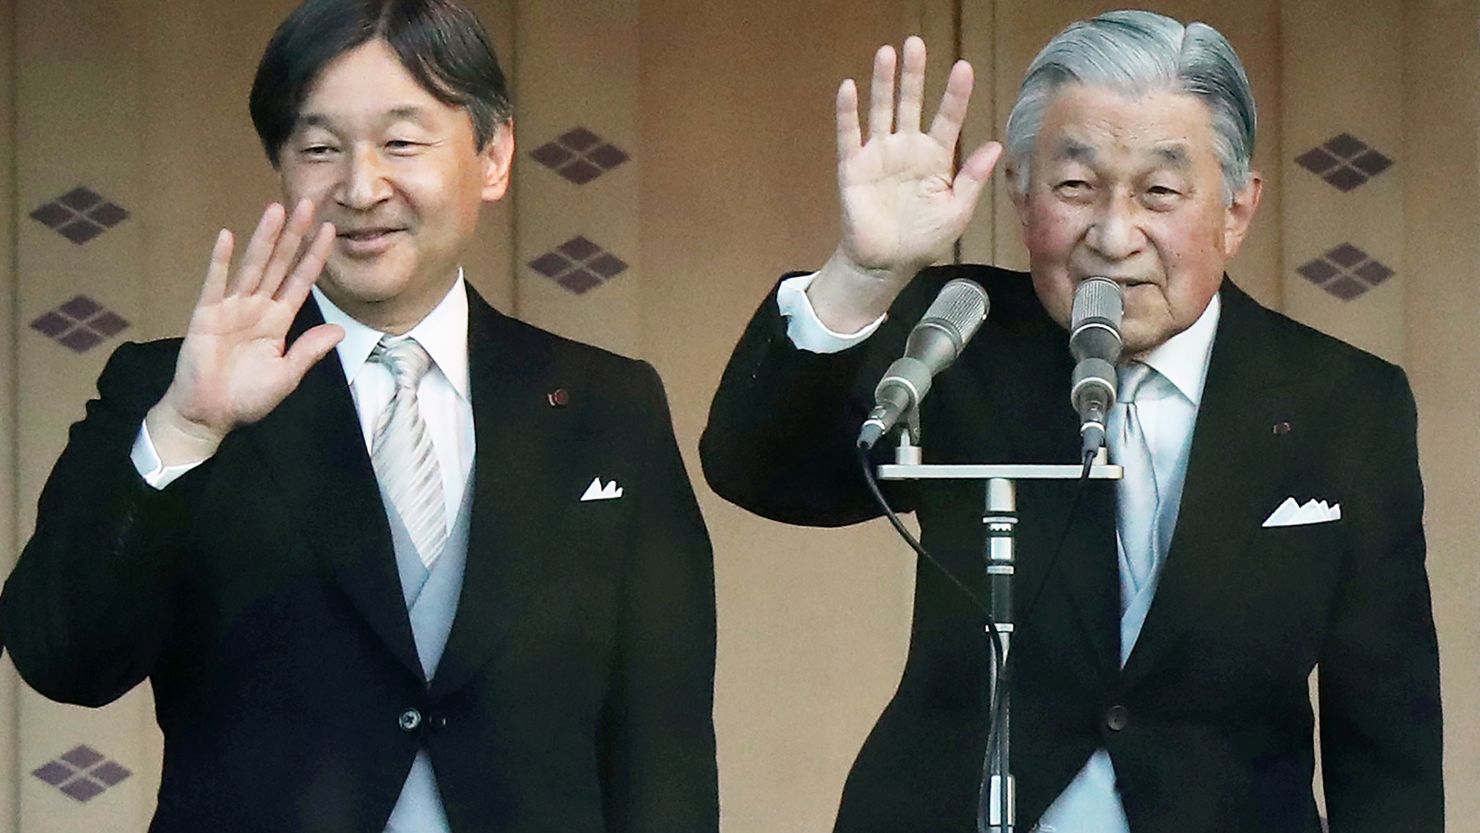 Japan's Emperor Akihito and his successor, Crown Prince Naruhito wave to the crowd during the emperor's New Year's greeting ceremony.